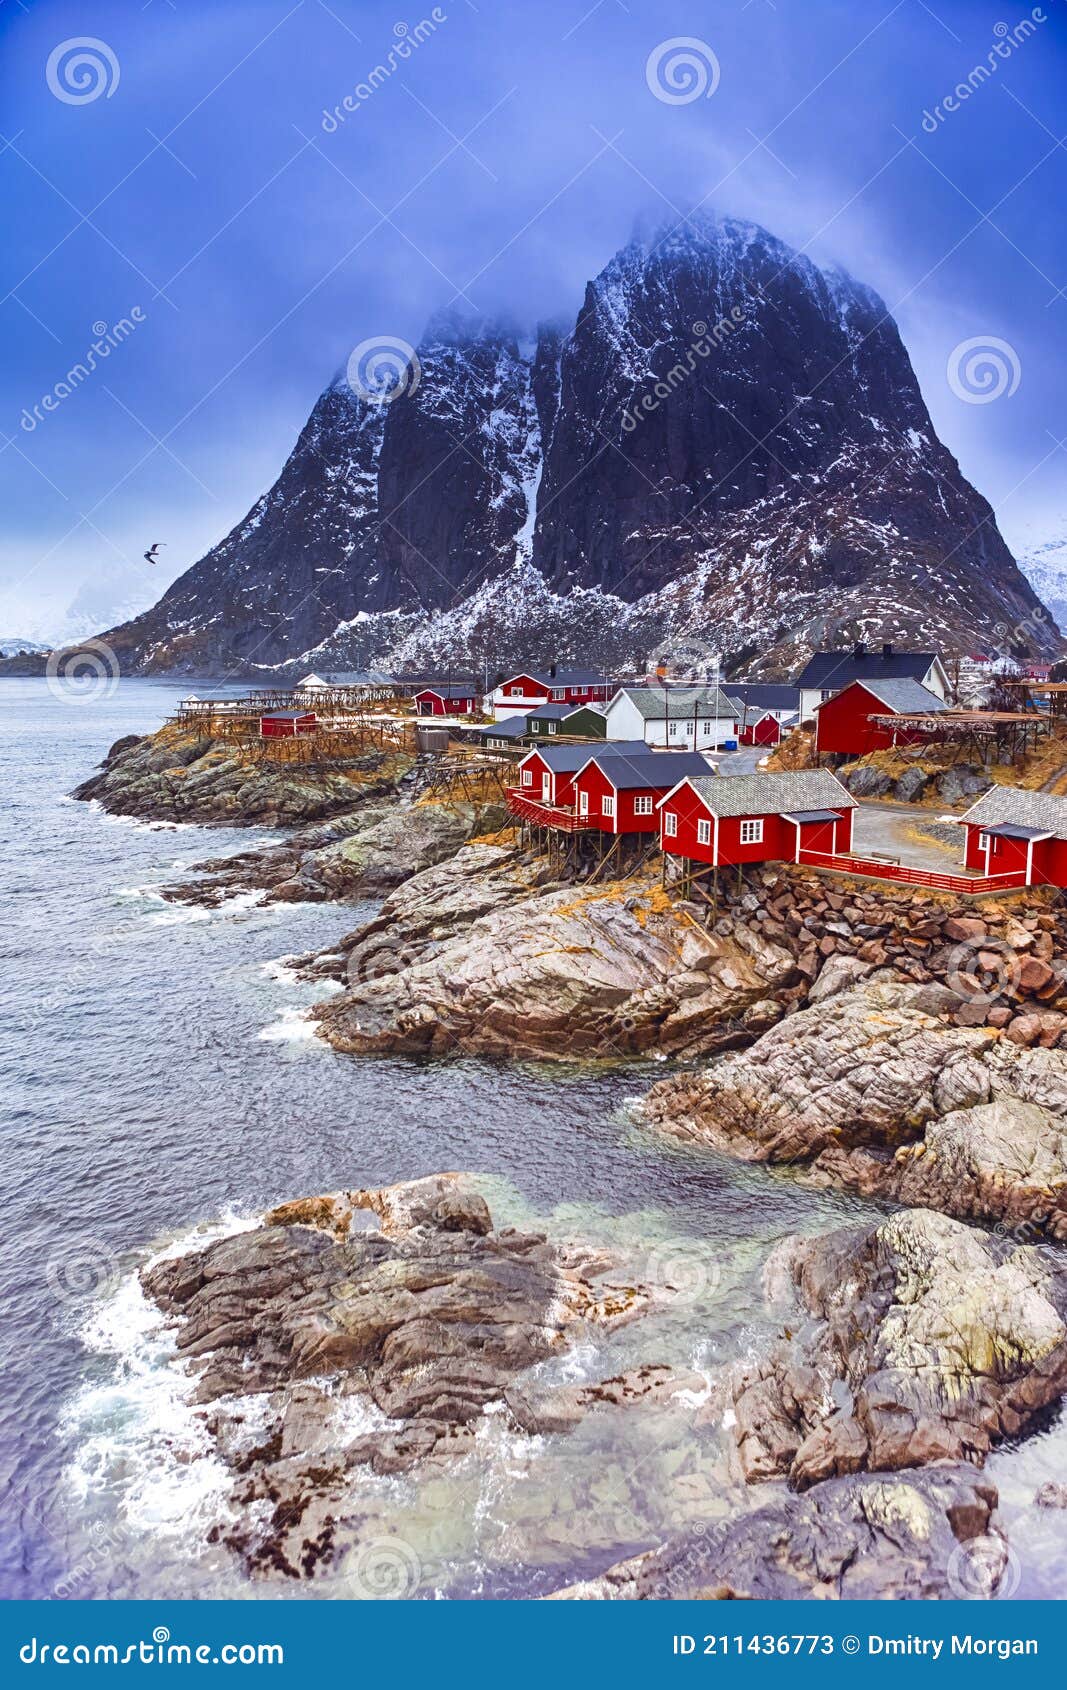 Norway Traveling Famous Tourist Attraction Hamnoy Fishing Village At